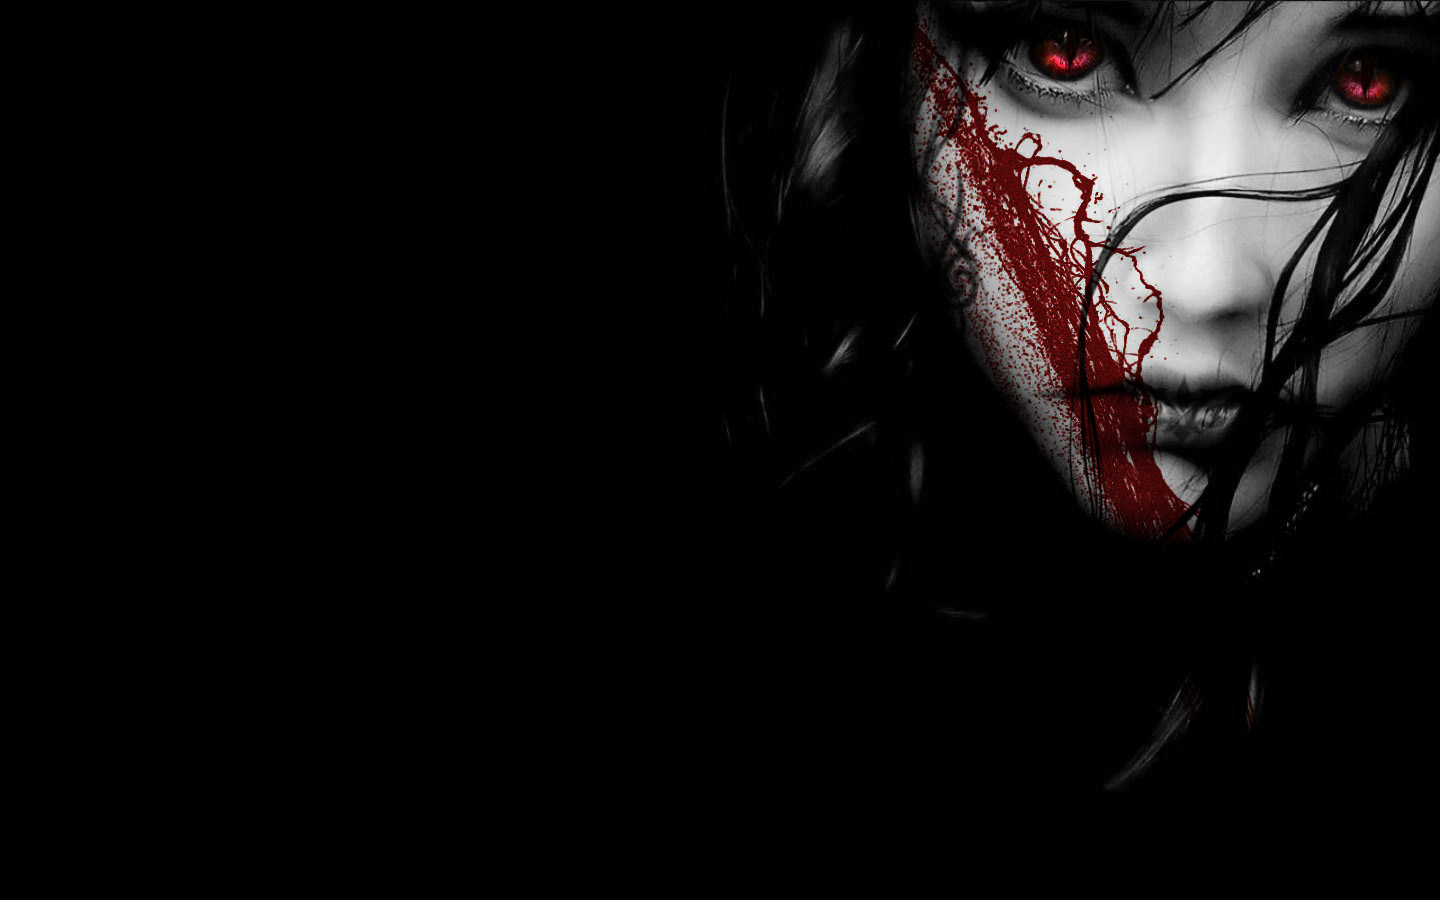 gothic wallpaper,face,red,darkness,head,fiction